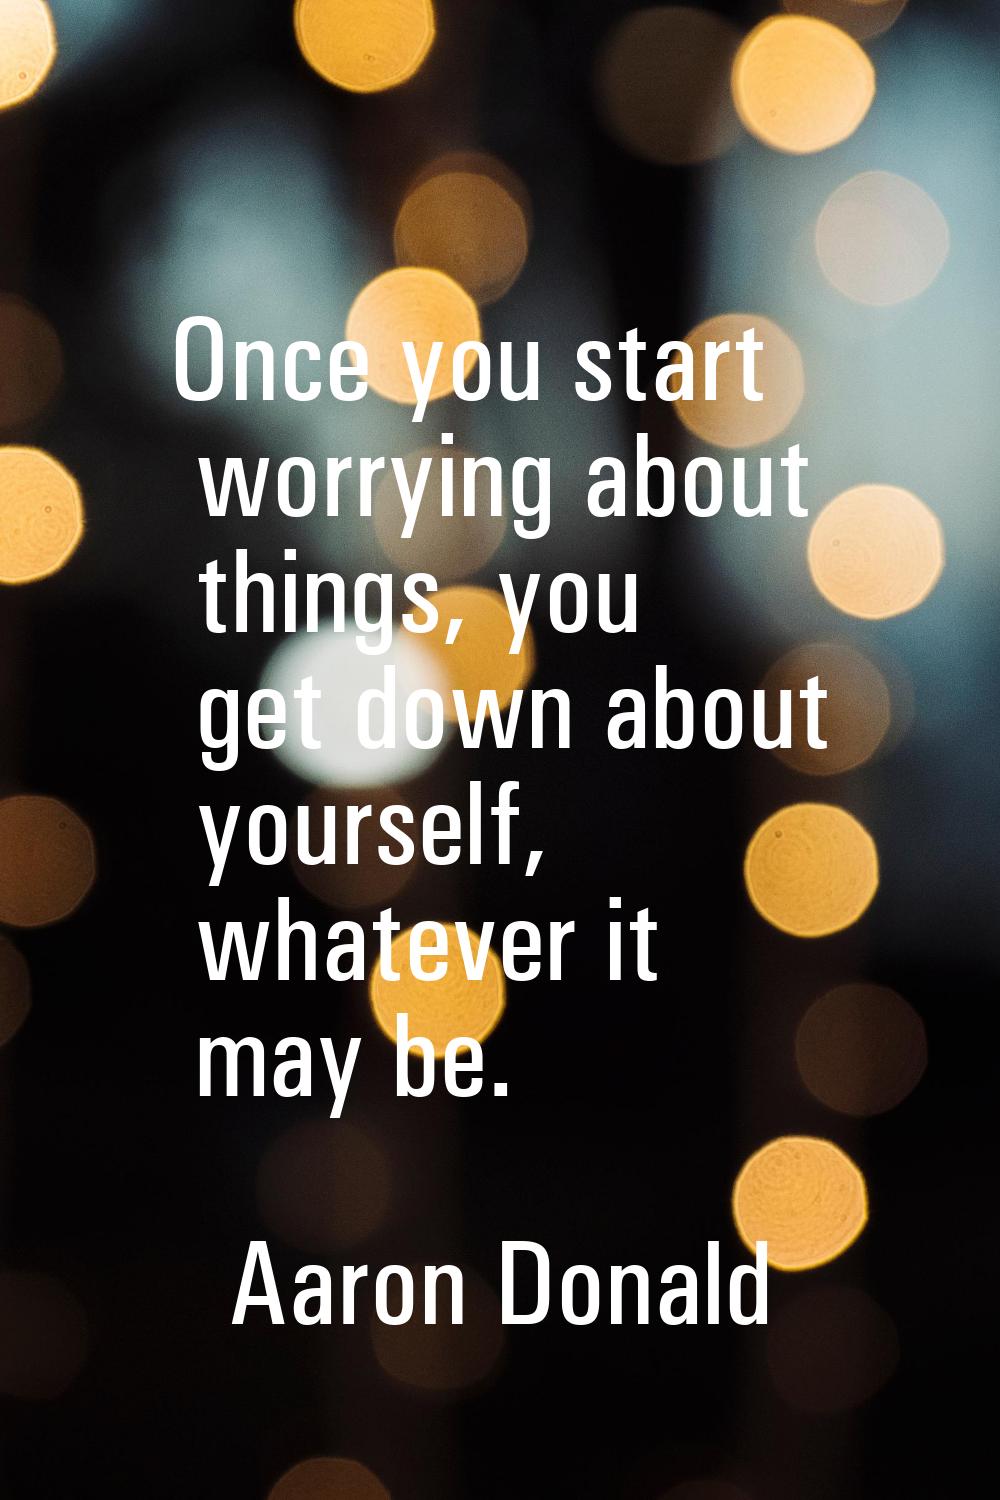 Once you start worrying about things, you get down about yourself, whatever it may be.